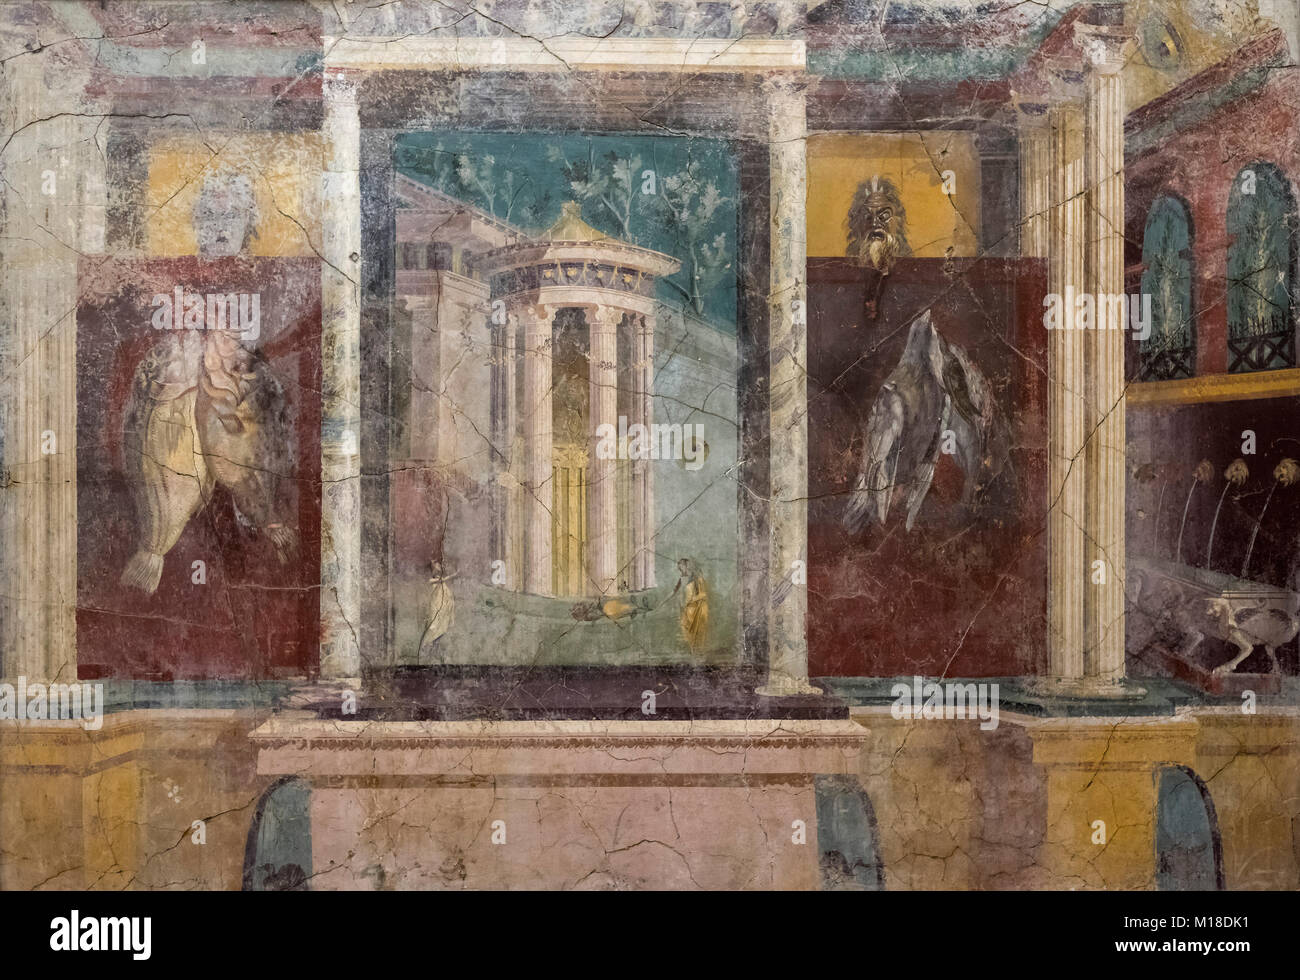 Naples. Italy. Fresco depicting an architectural landscape with tholos. Museo Archeologico Nazionale di Napoli. Naples National Archaeological Museum. Stock Photo